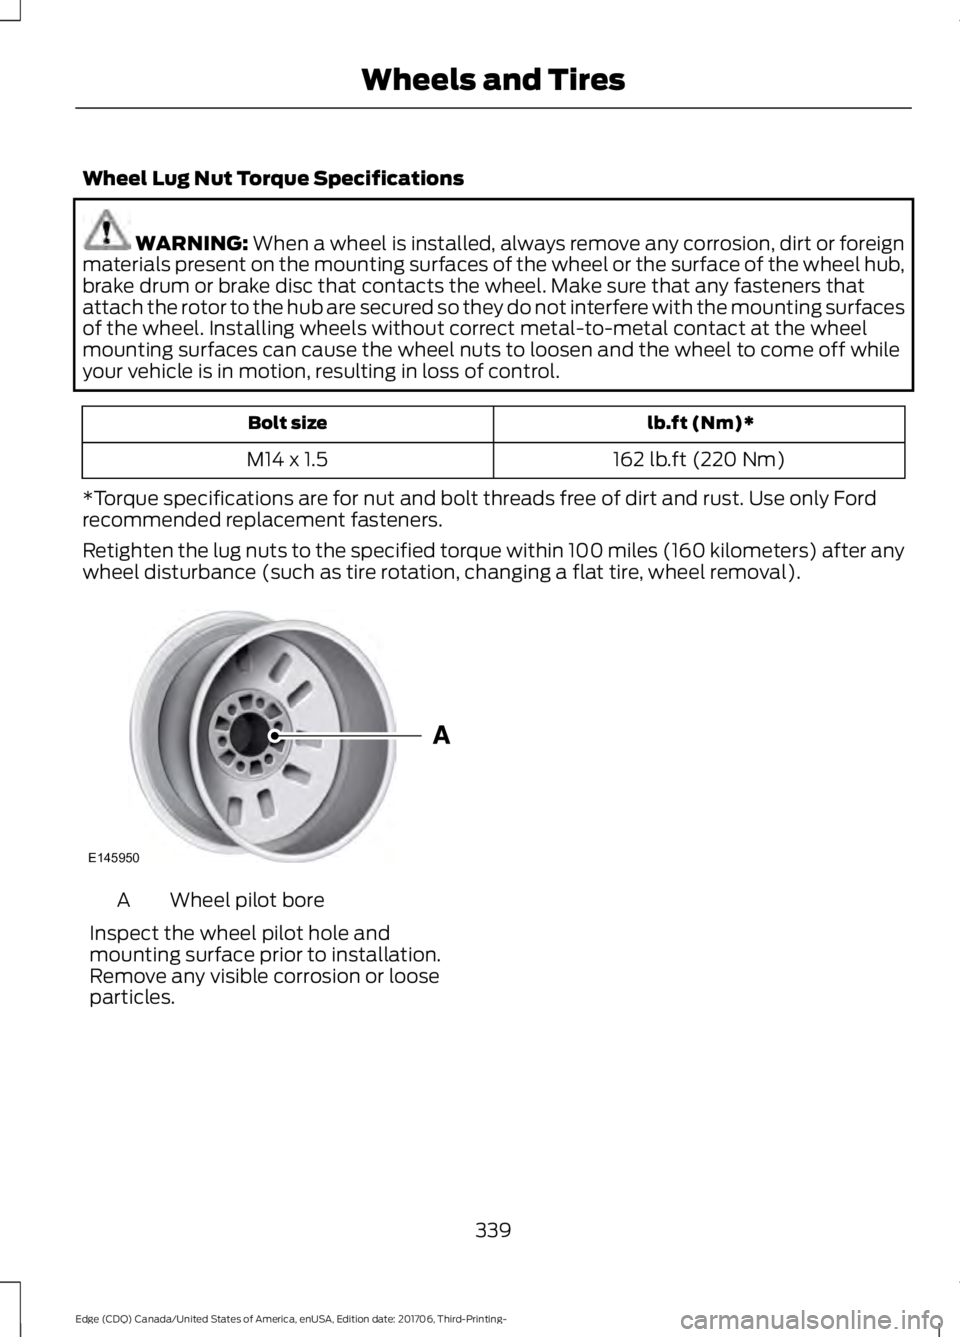 FORD EDGE 2018  Owners Manual Wheel Lug Nut Torque Specifications
WARNING: When a wheel is installed, always remove any corrosion, dirt or foreign
materials present on the mounting surfaces of the wheel or the surface of the wheel